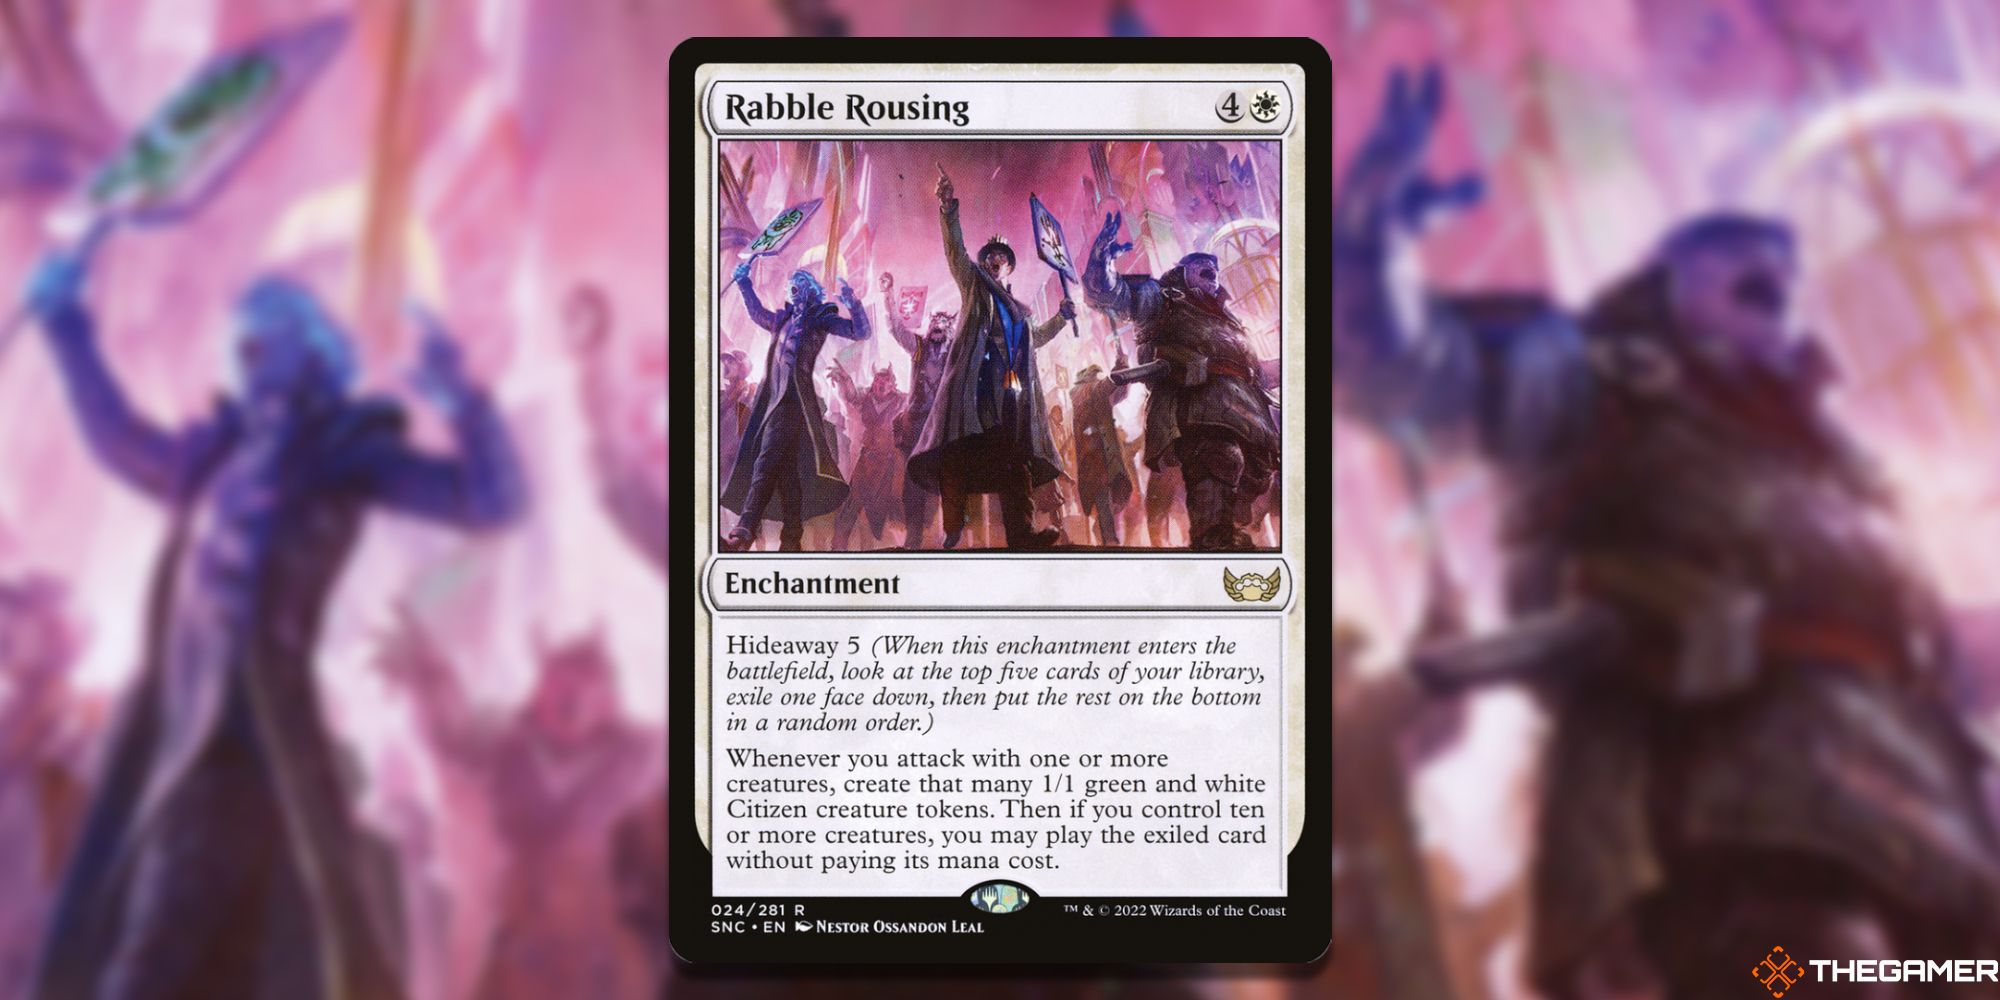 Image of the Rabble Rousing card in Magic: The Gathering, with art by Nestor Ossandon Leal